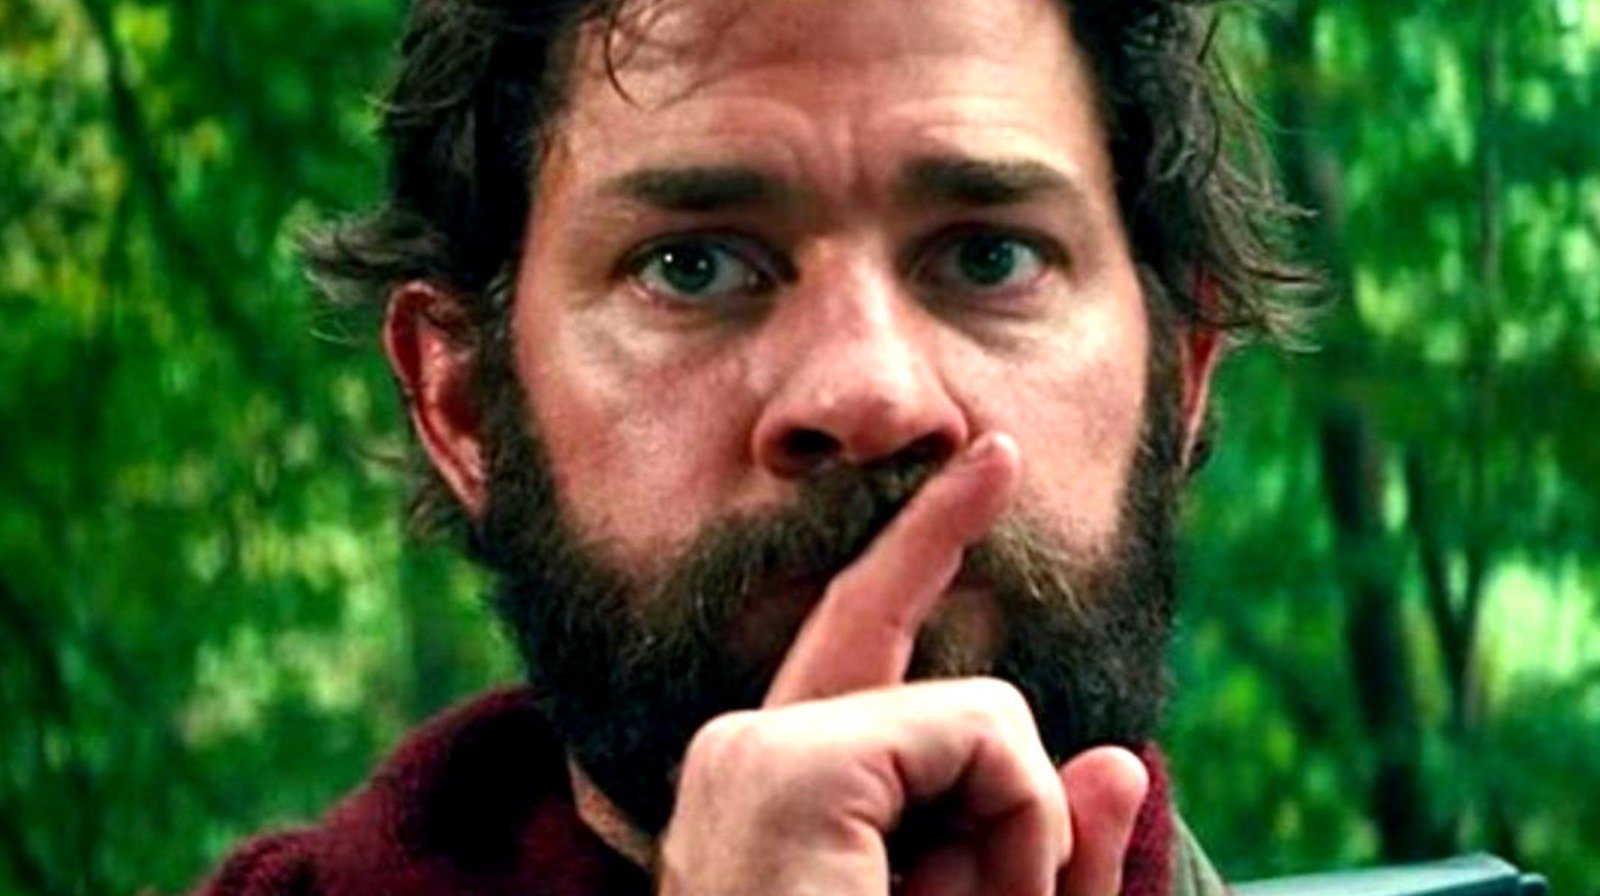 The Biggest Plot Hole In A Quiet Place According To Reddit - Looper